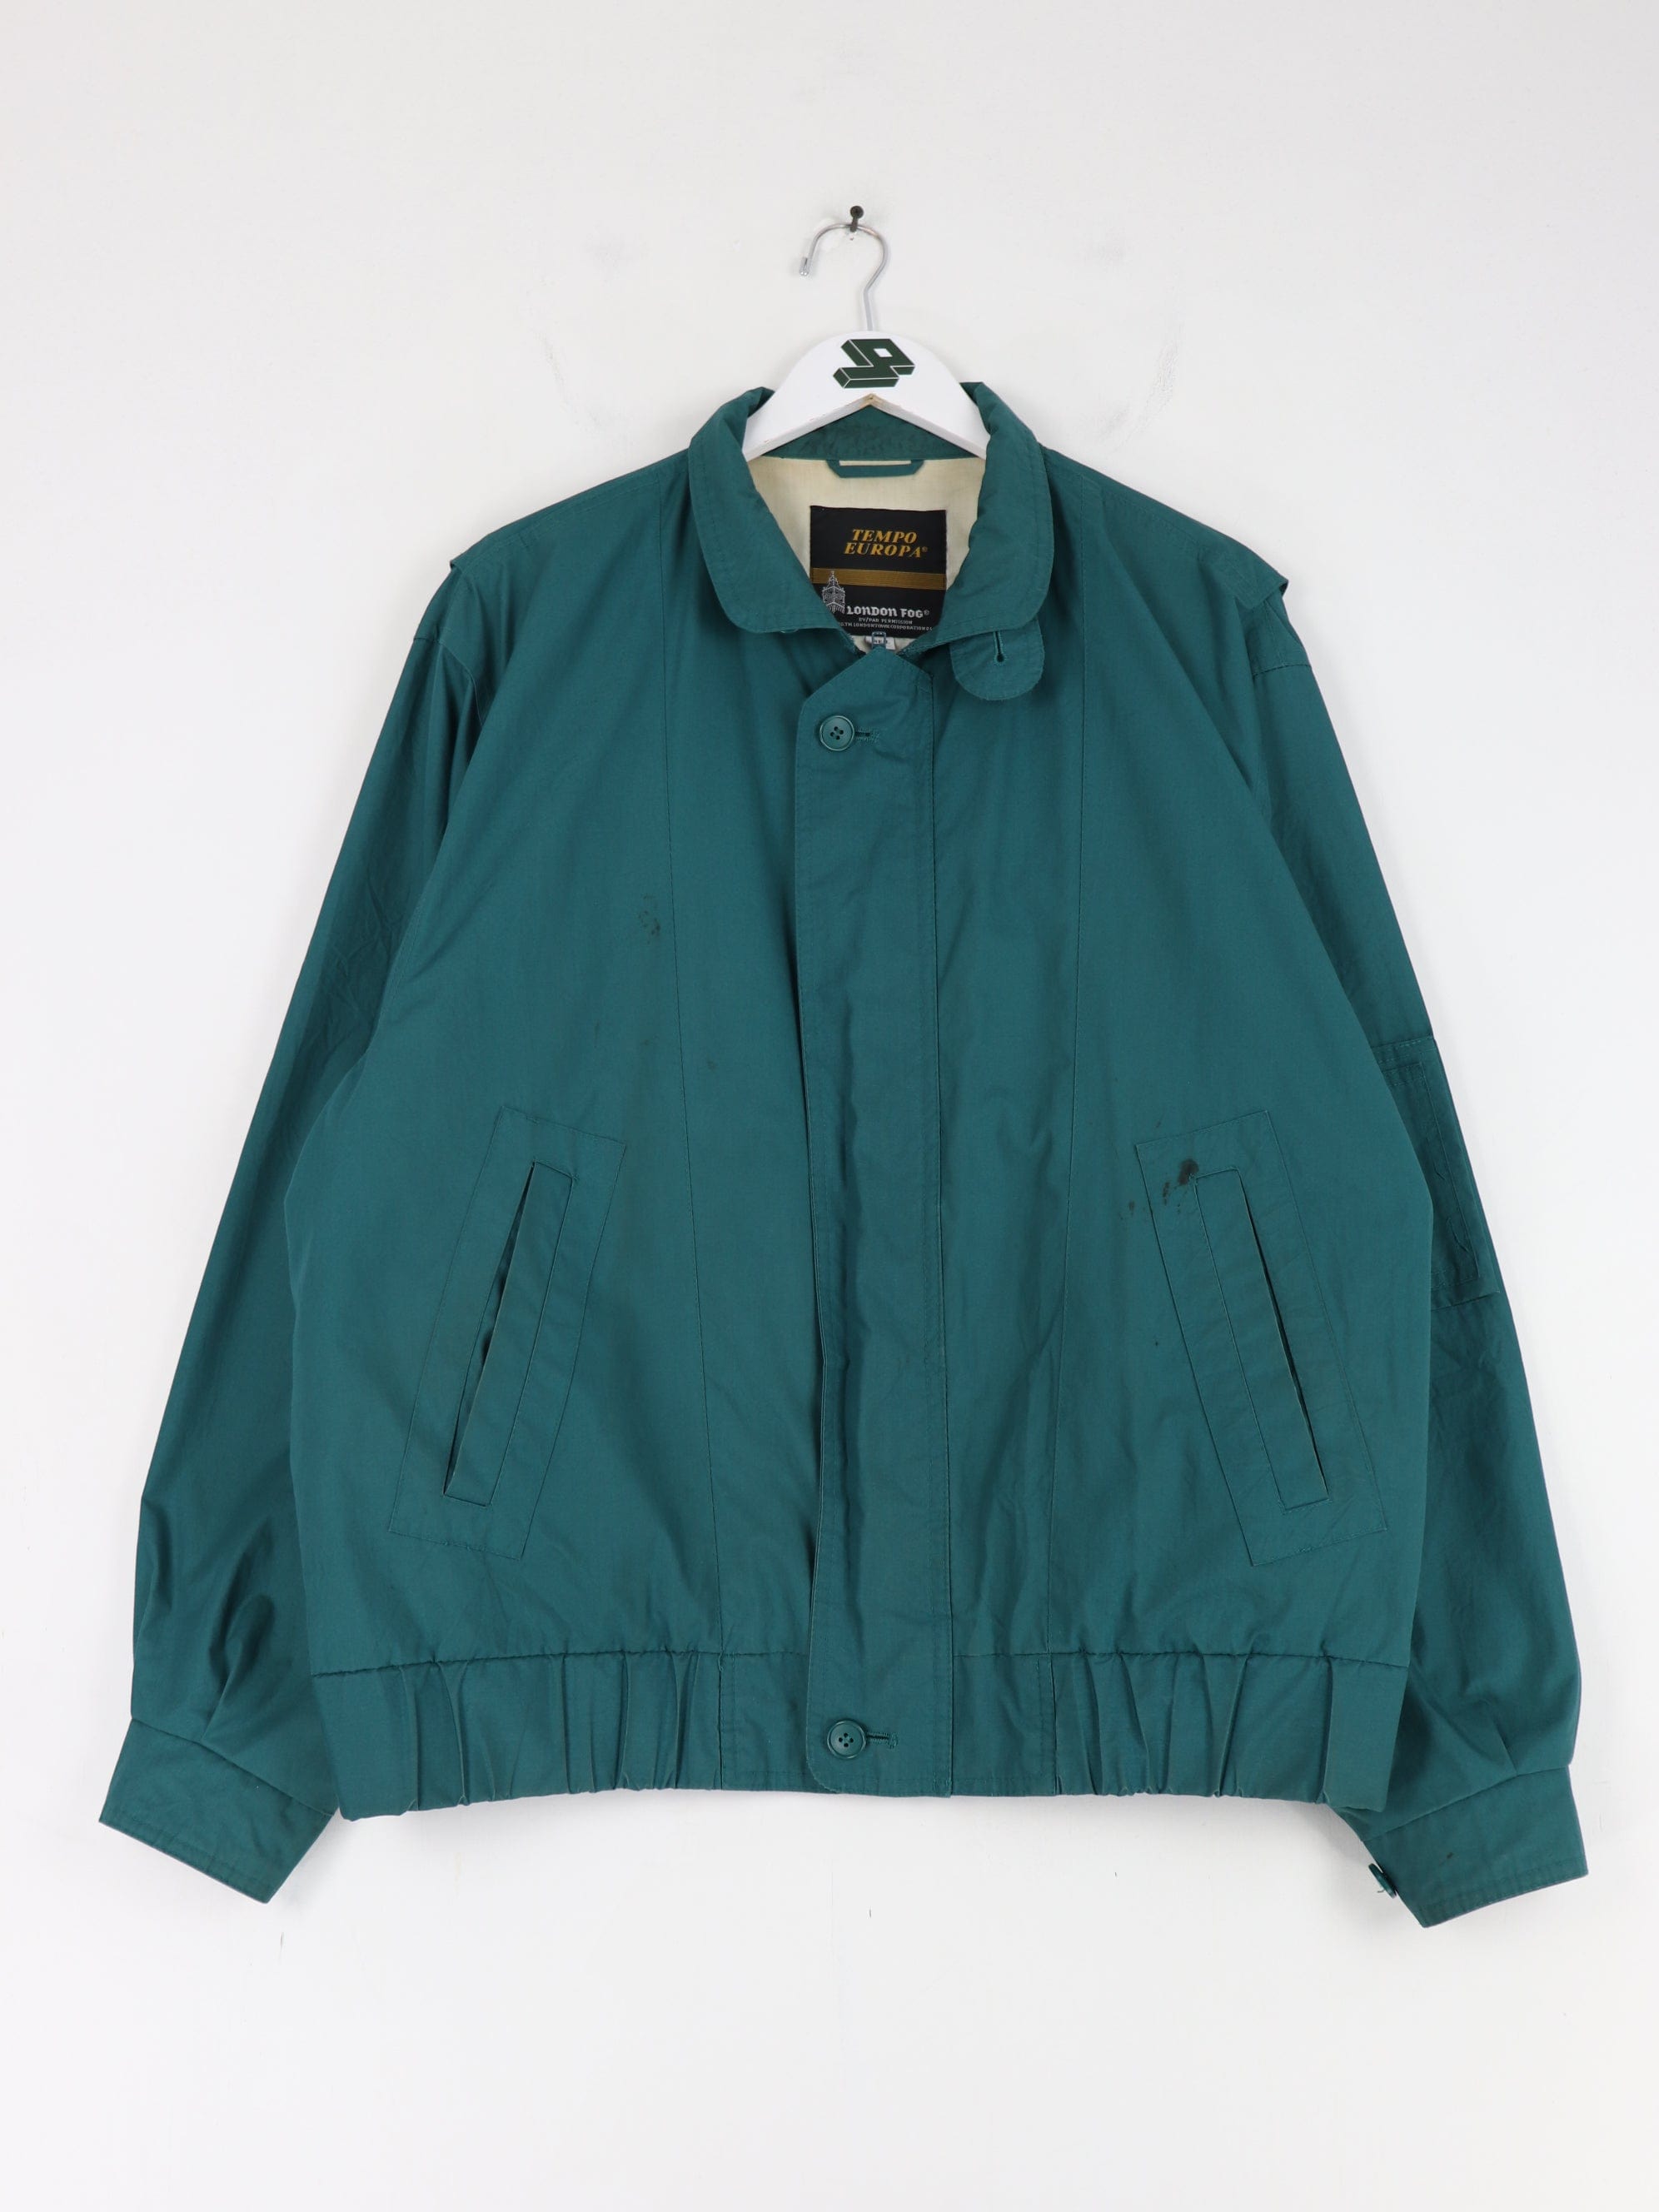 Vintage London Fog Jacket Mens Large Green Tempo Europa Casual 90s